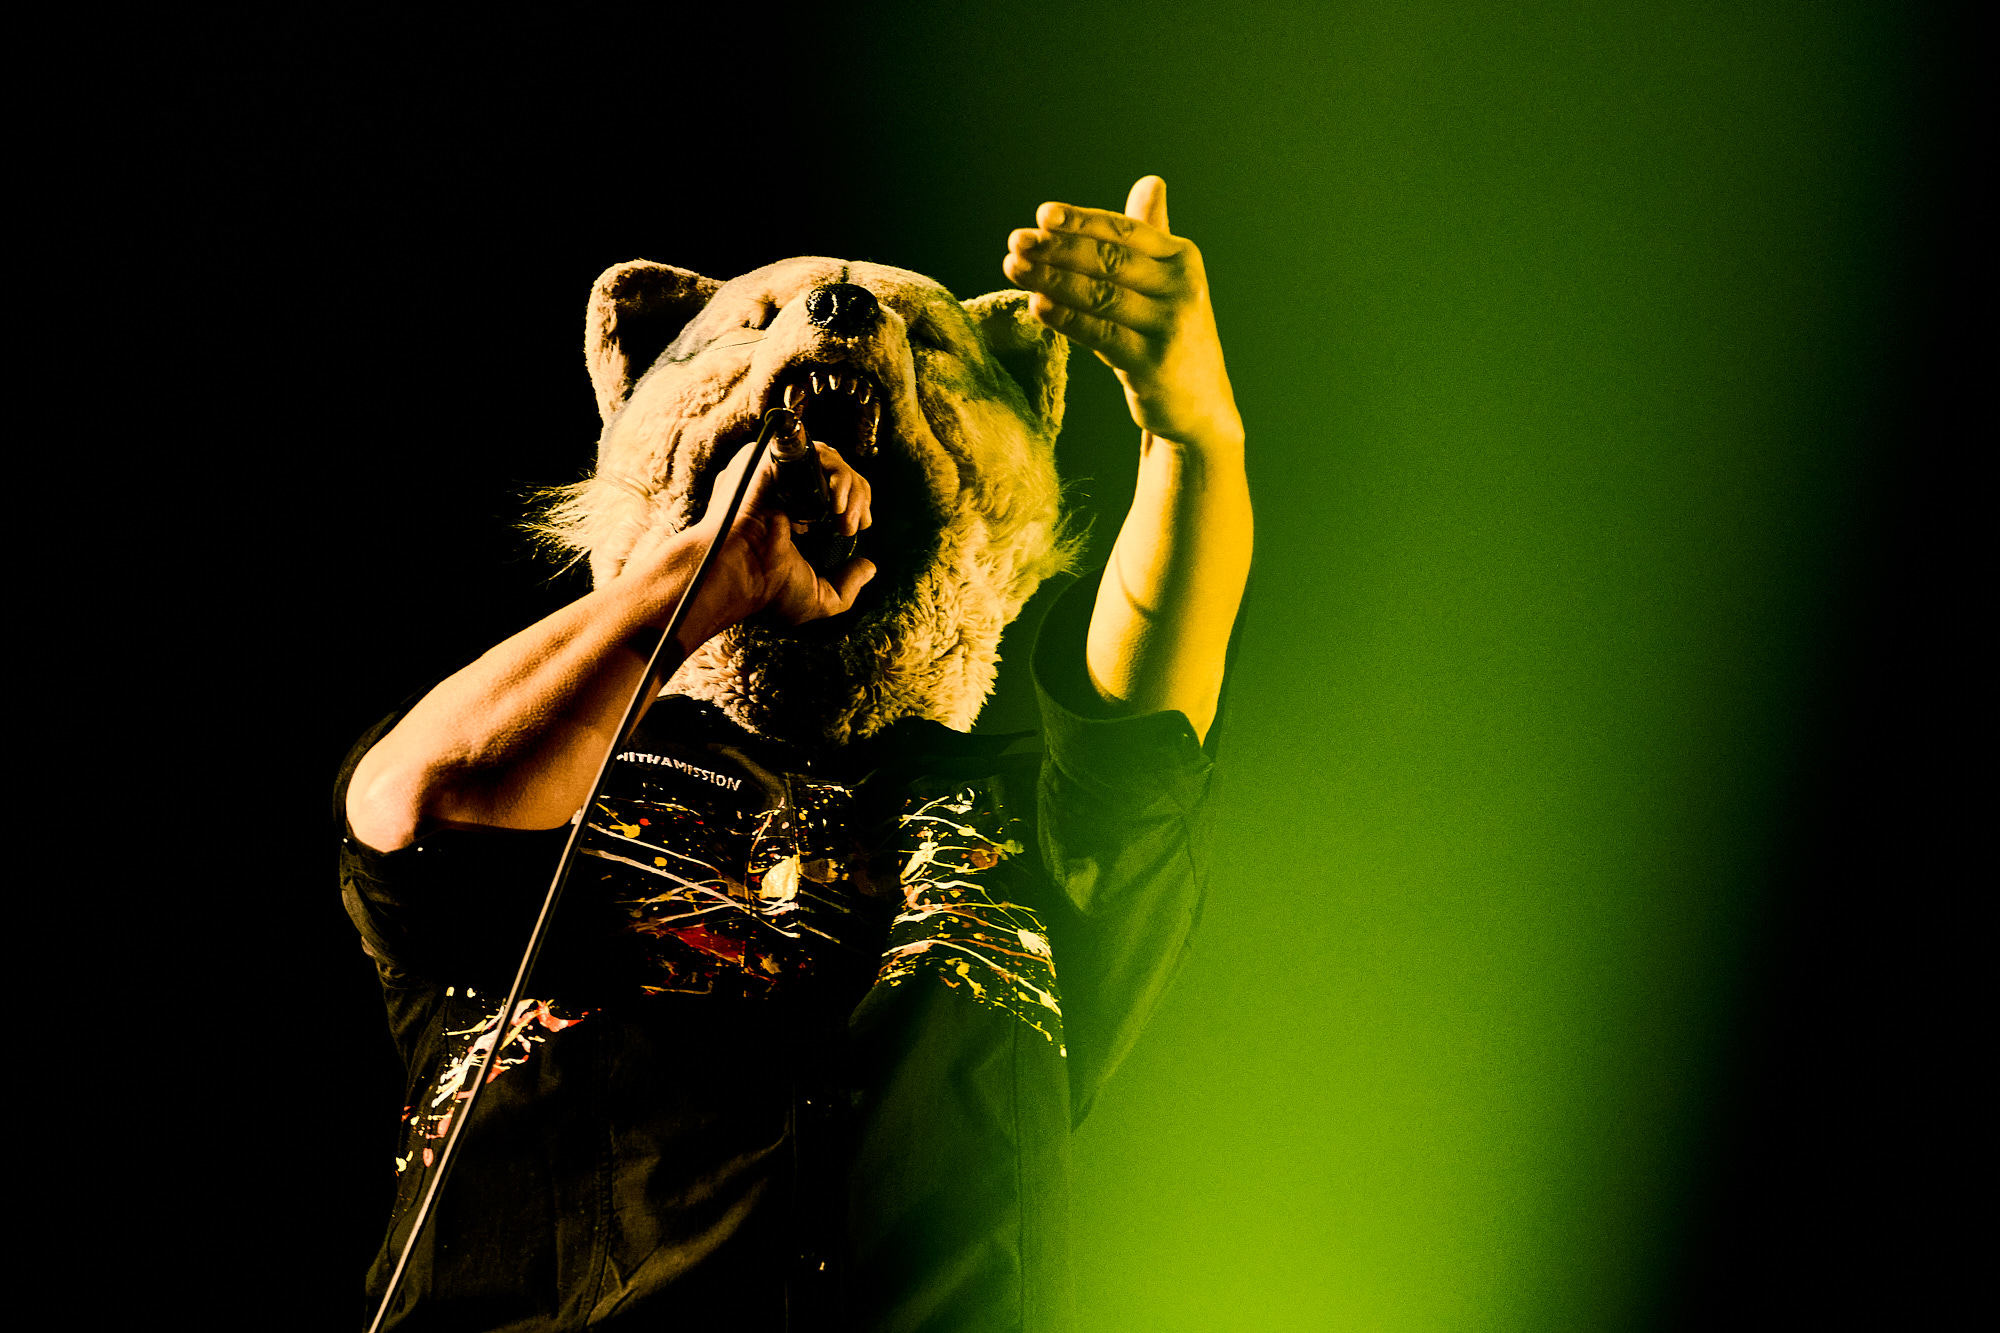 MAN WITH A MISSION　撮影＝酒井ダイスケ